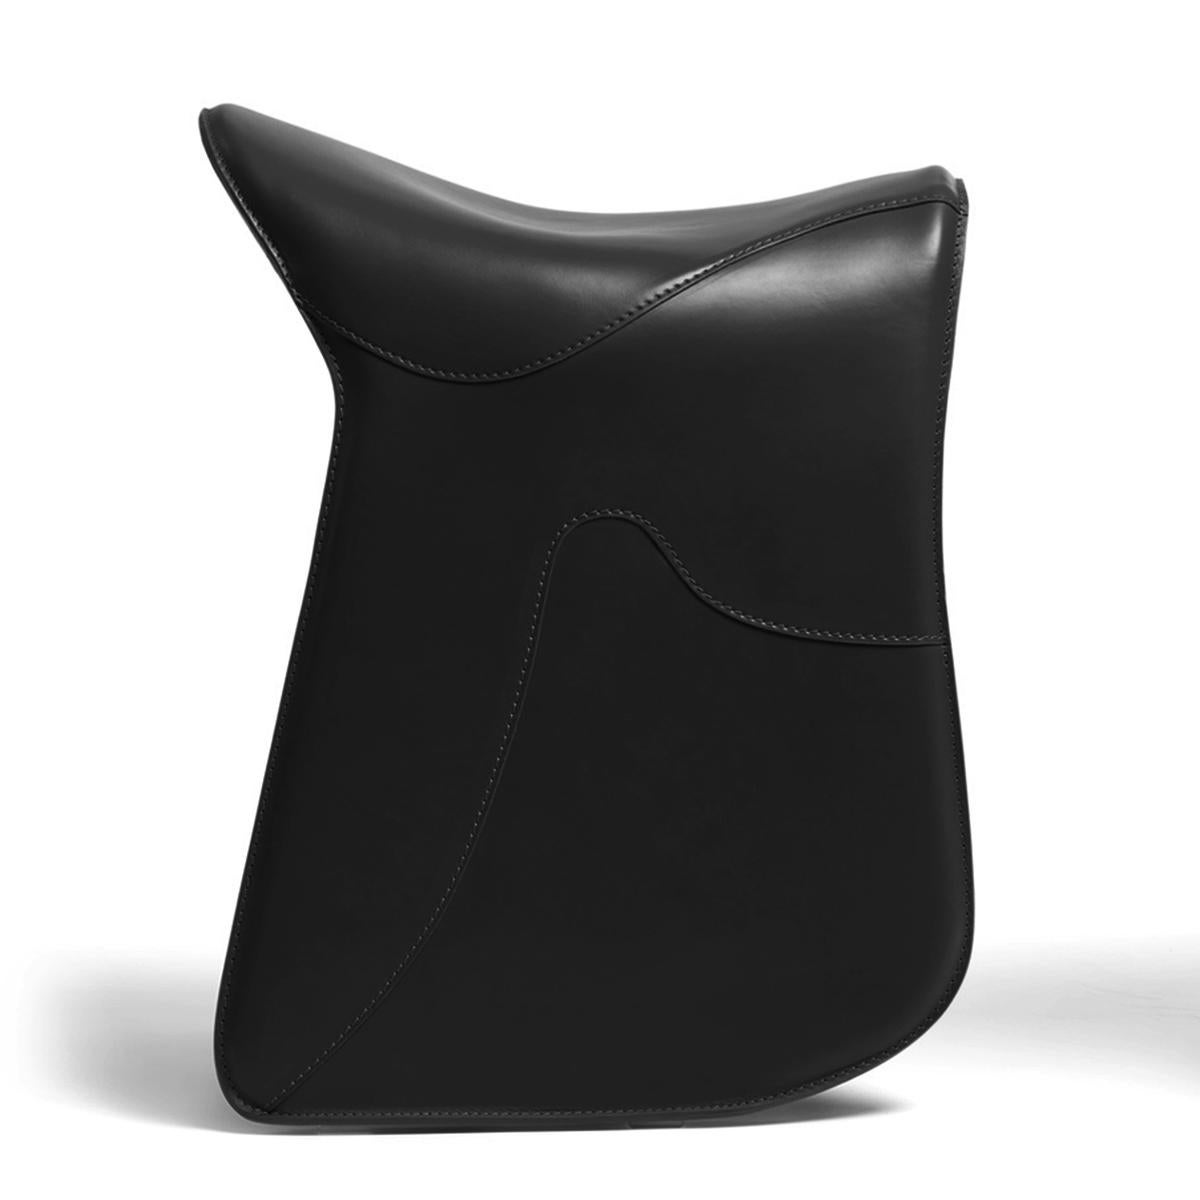 Stool Cavallero black with structure in
steel and upholstered and covered with
handstitched genuine full grain black leather.
Also available in brown leather.